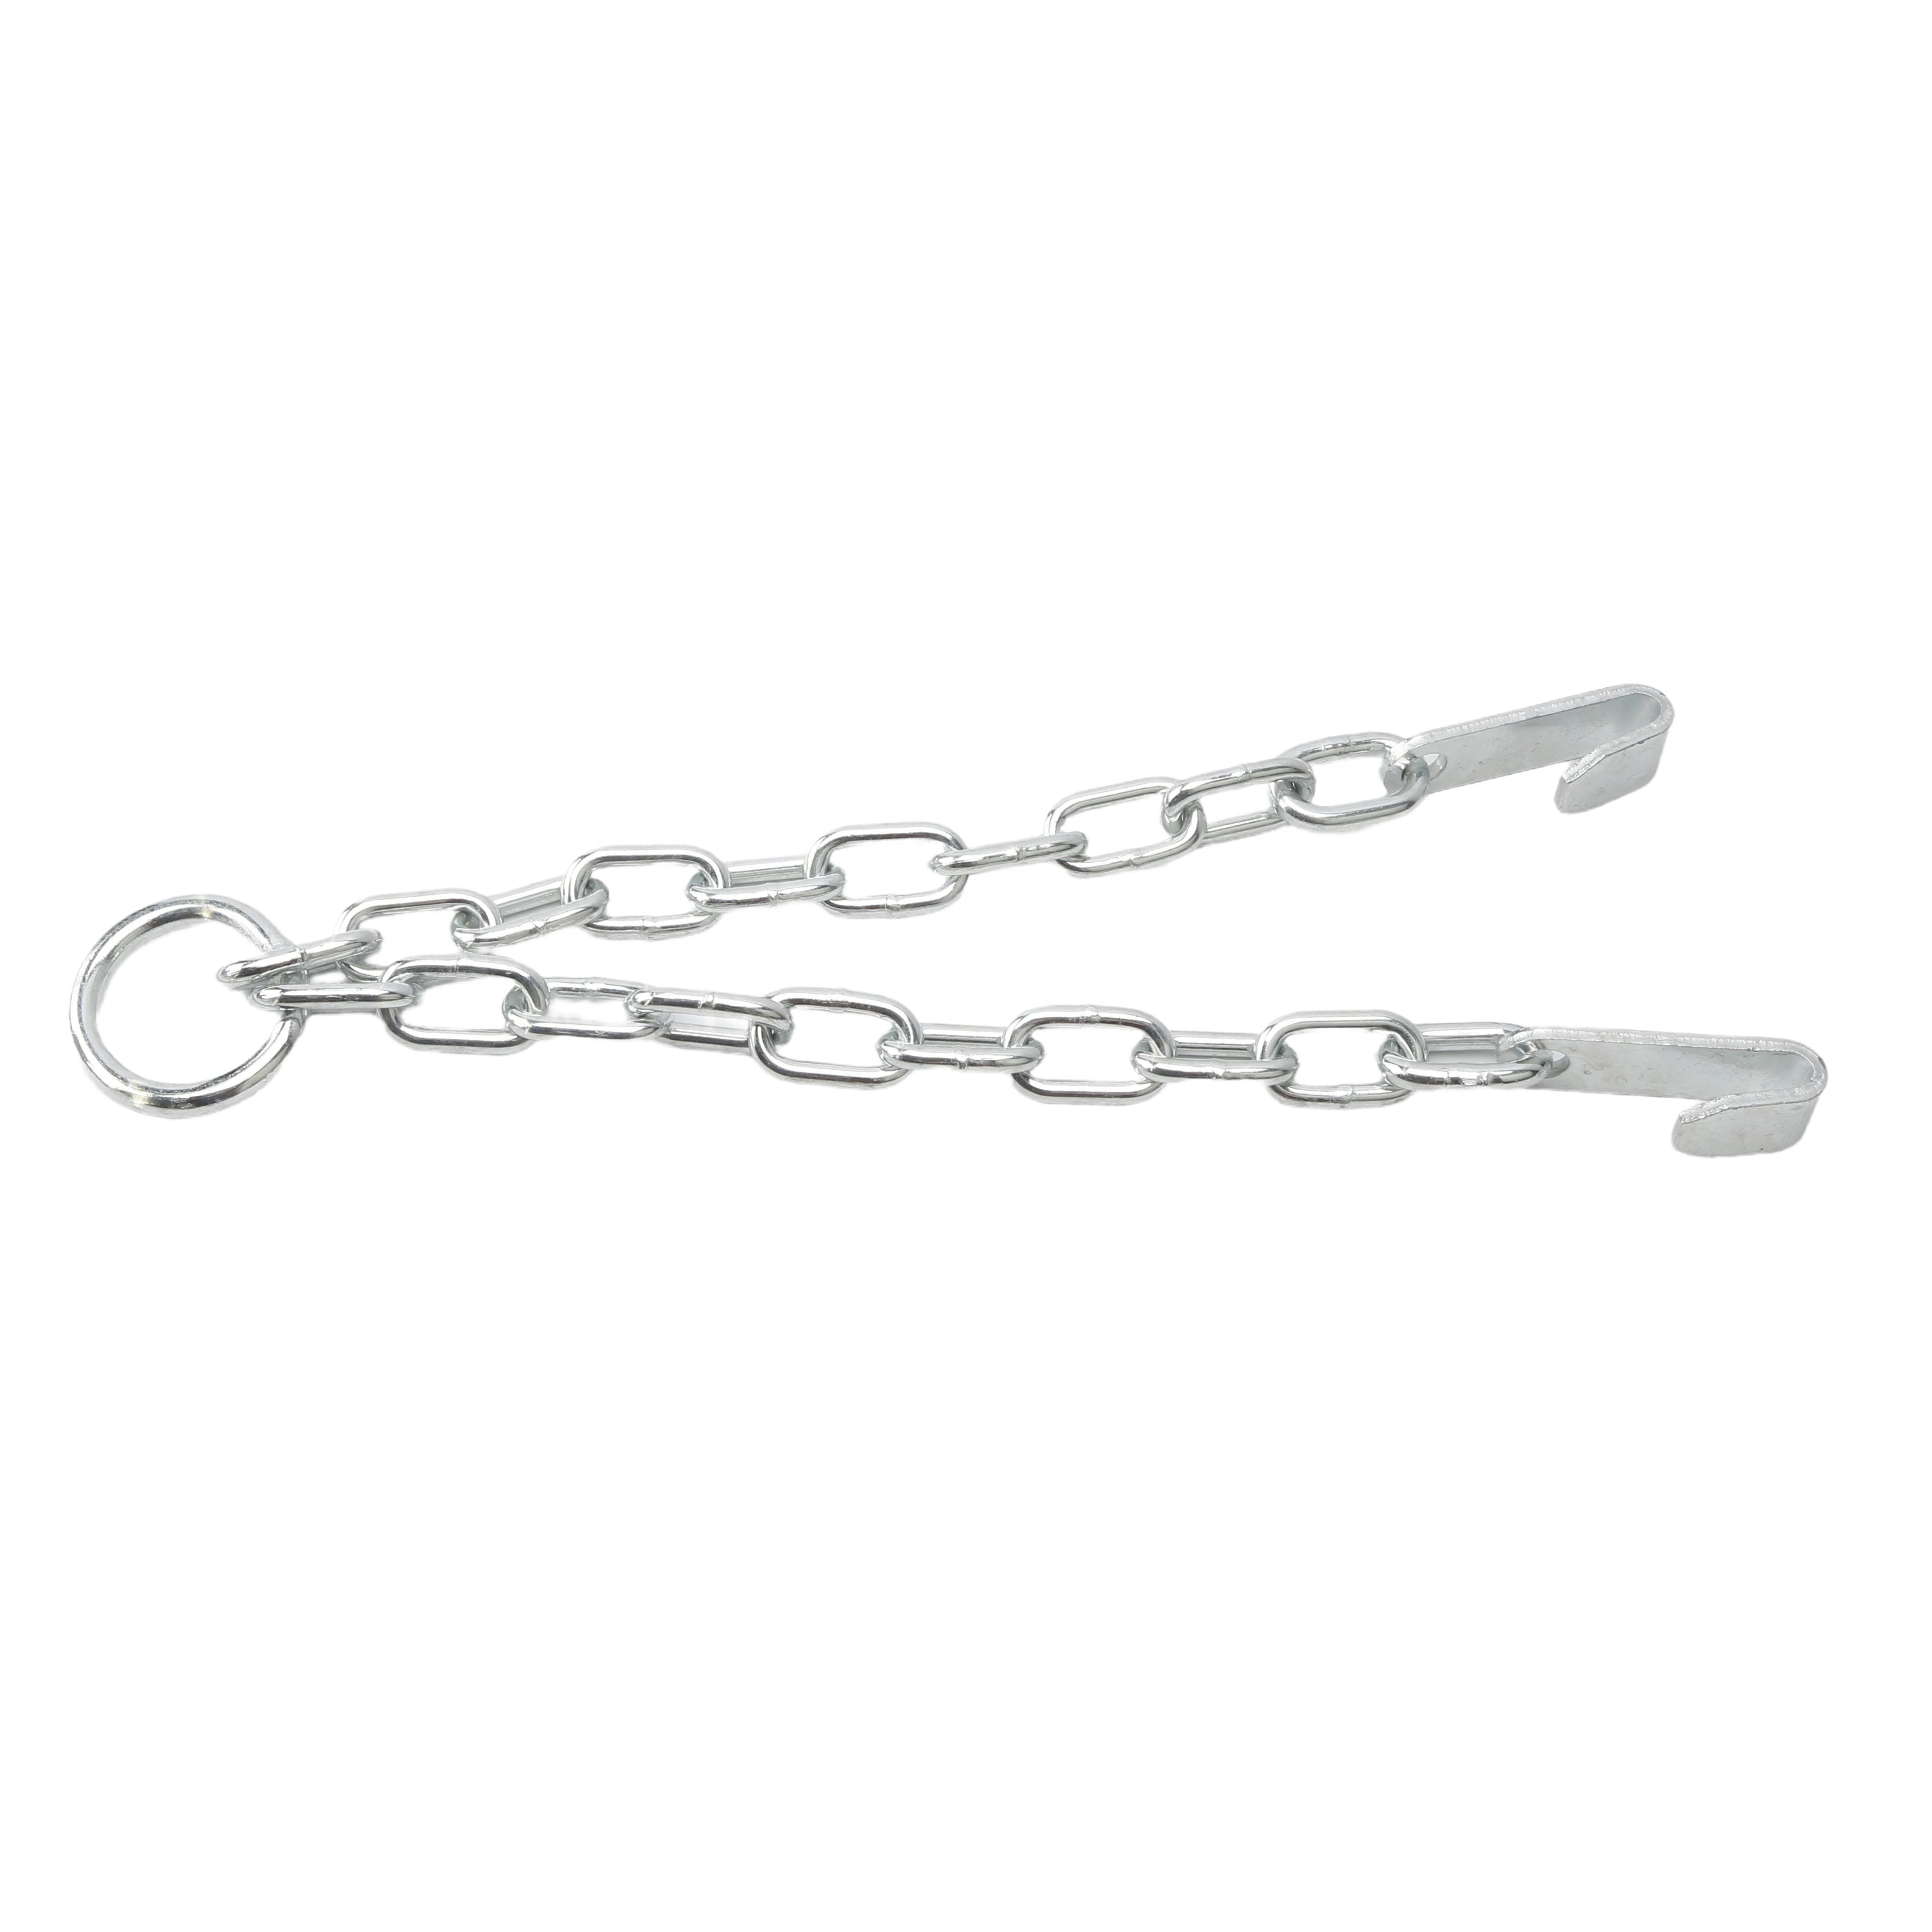 Chain Link Fence Fabric Pull Chain Stretcher Tool (1000 lbs. Pull